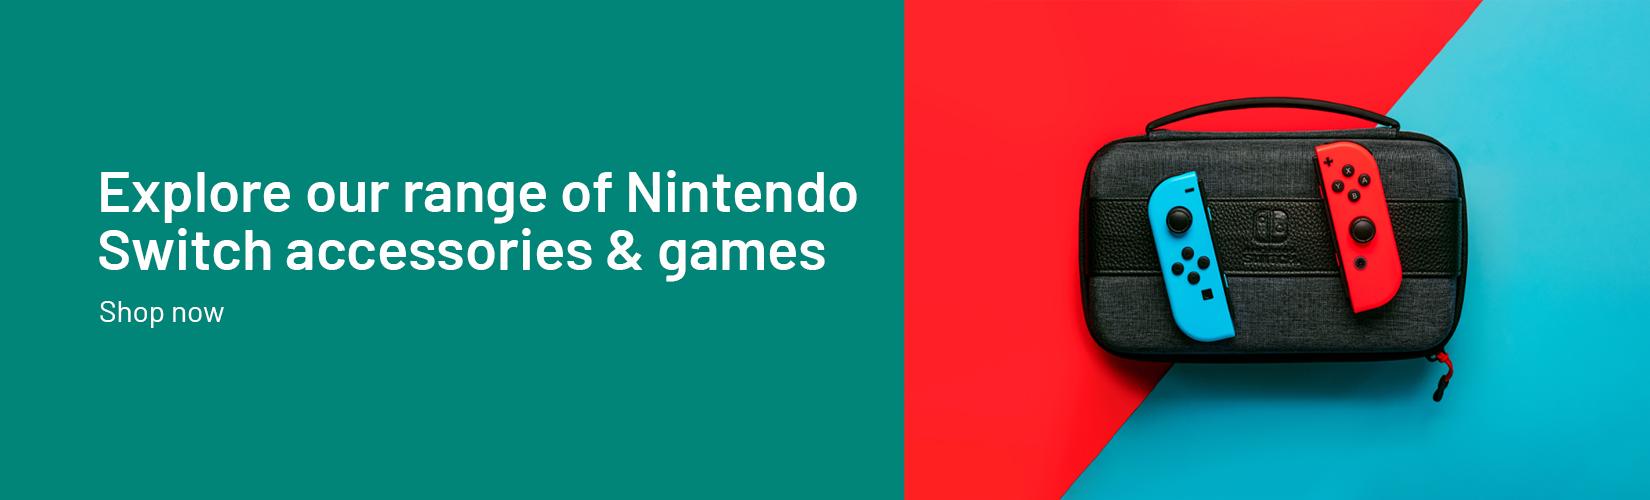 Explore our range of Nintendo Switch accessories & games.